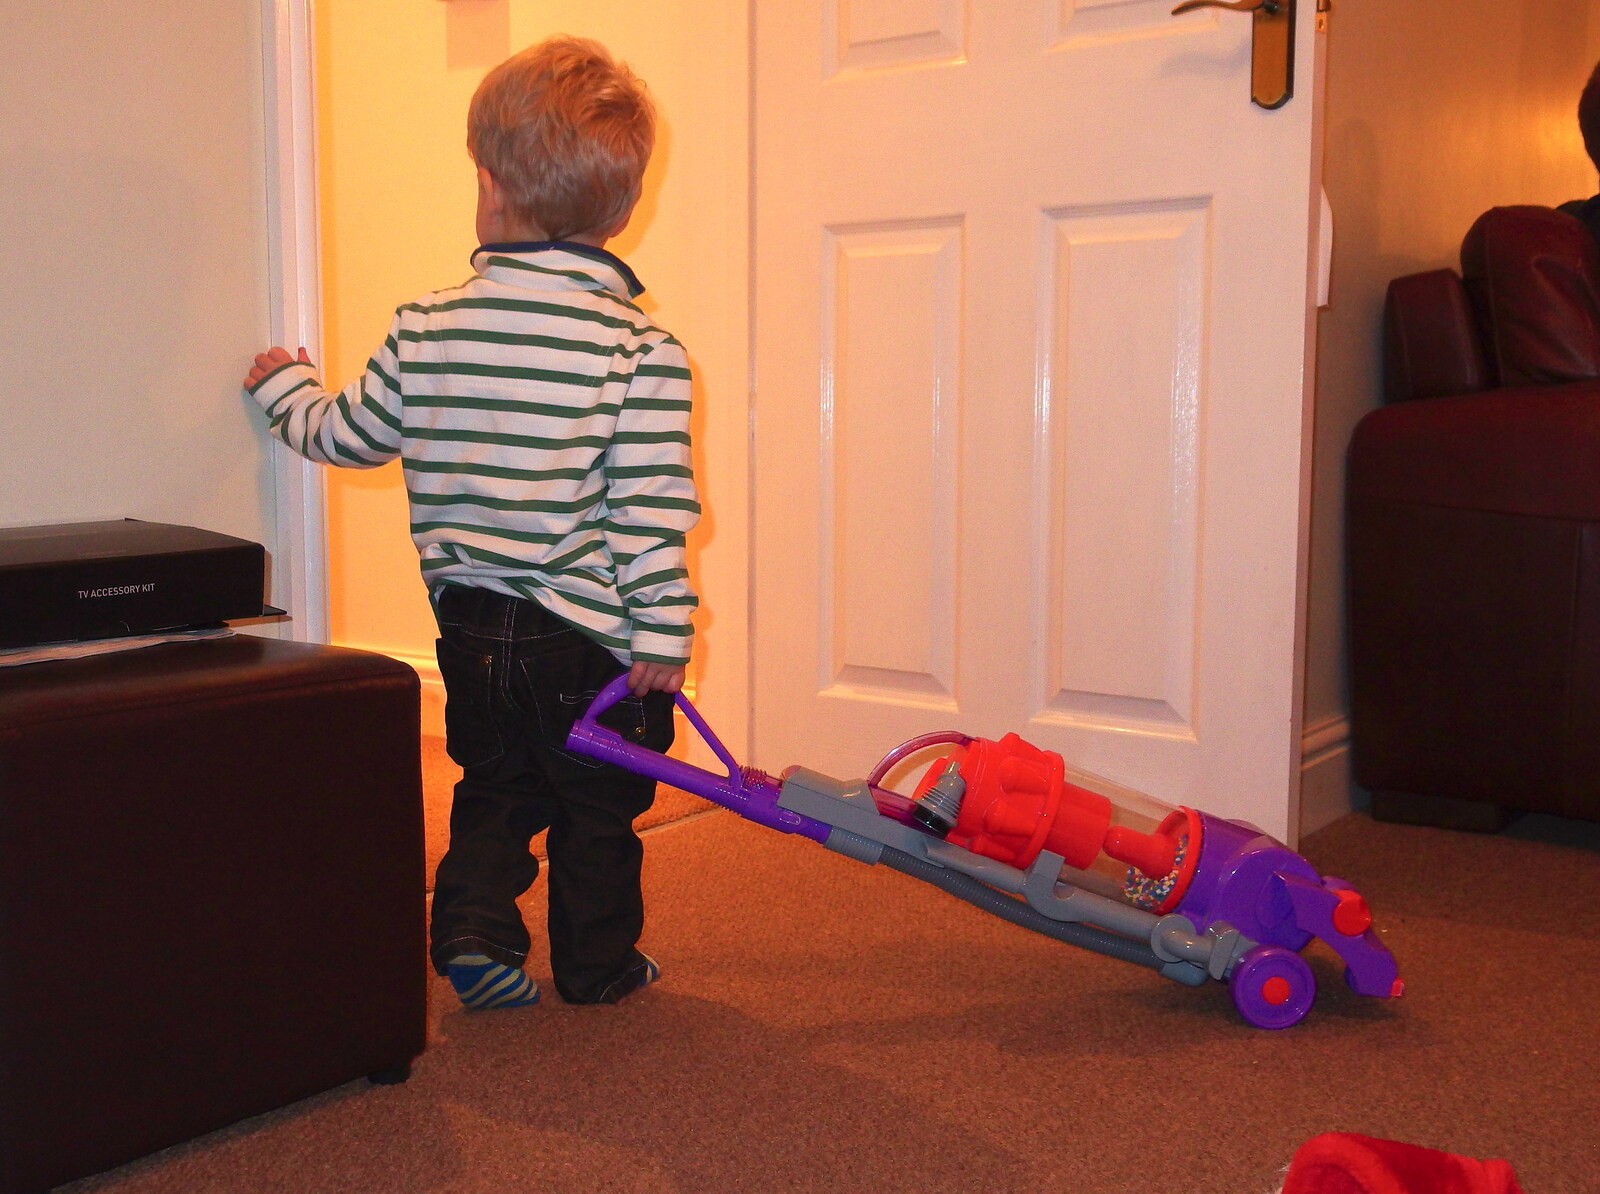 Jack looks up the corridor, with his hoover from A Christmas Party, Brome, Suffolk - 21st December 2013